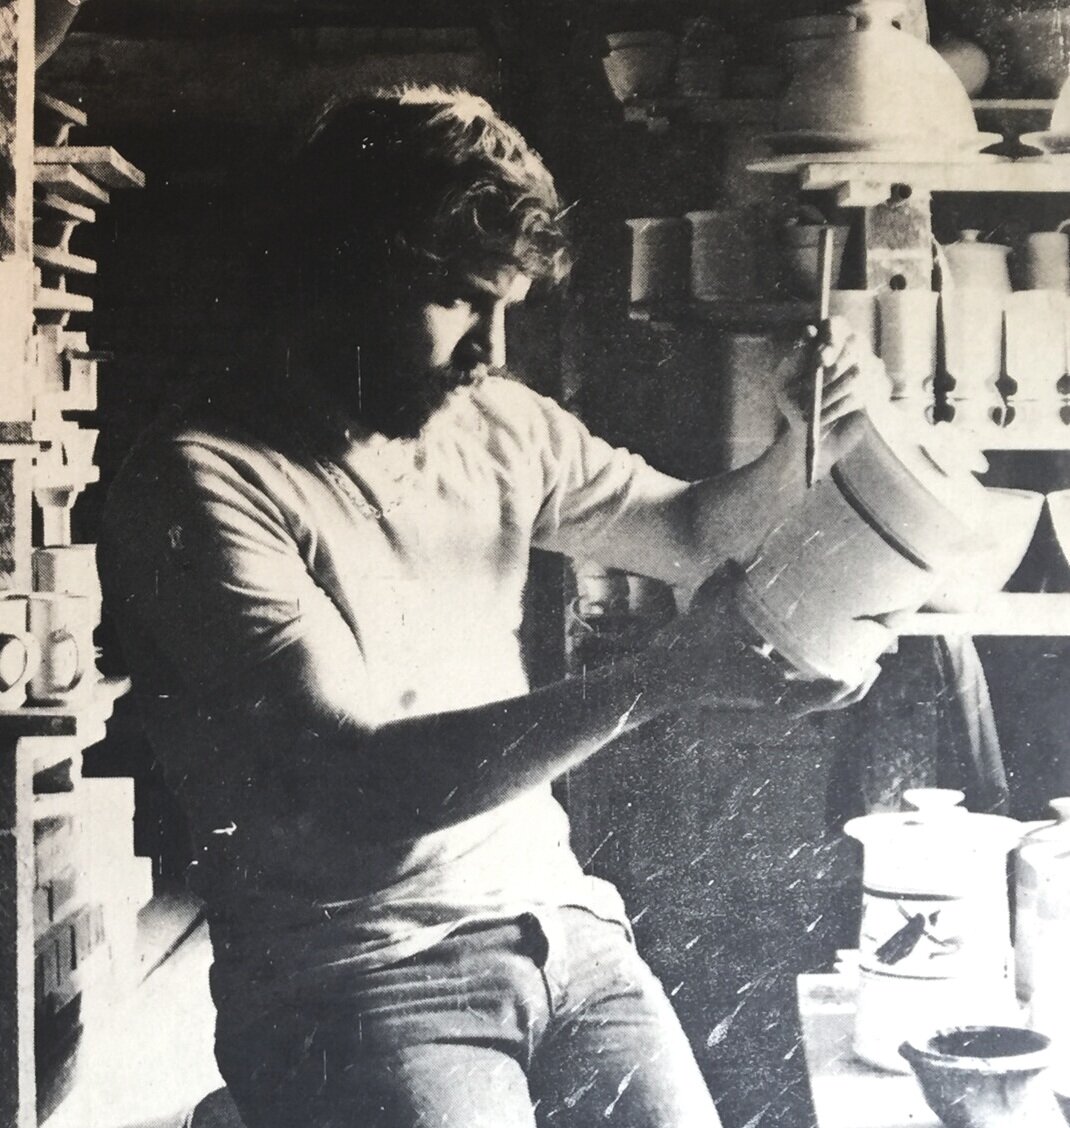  Decorating, Broomhill Pottery, late 1970s 